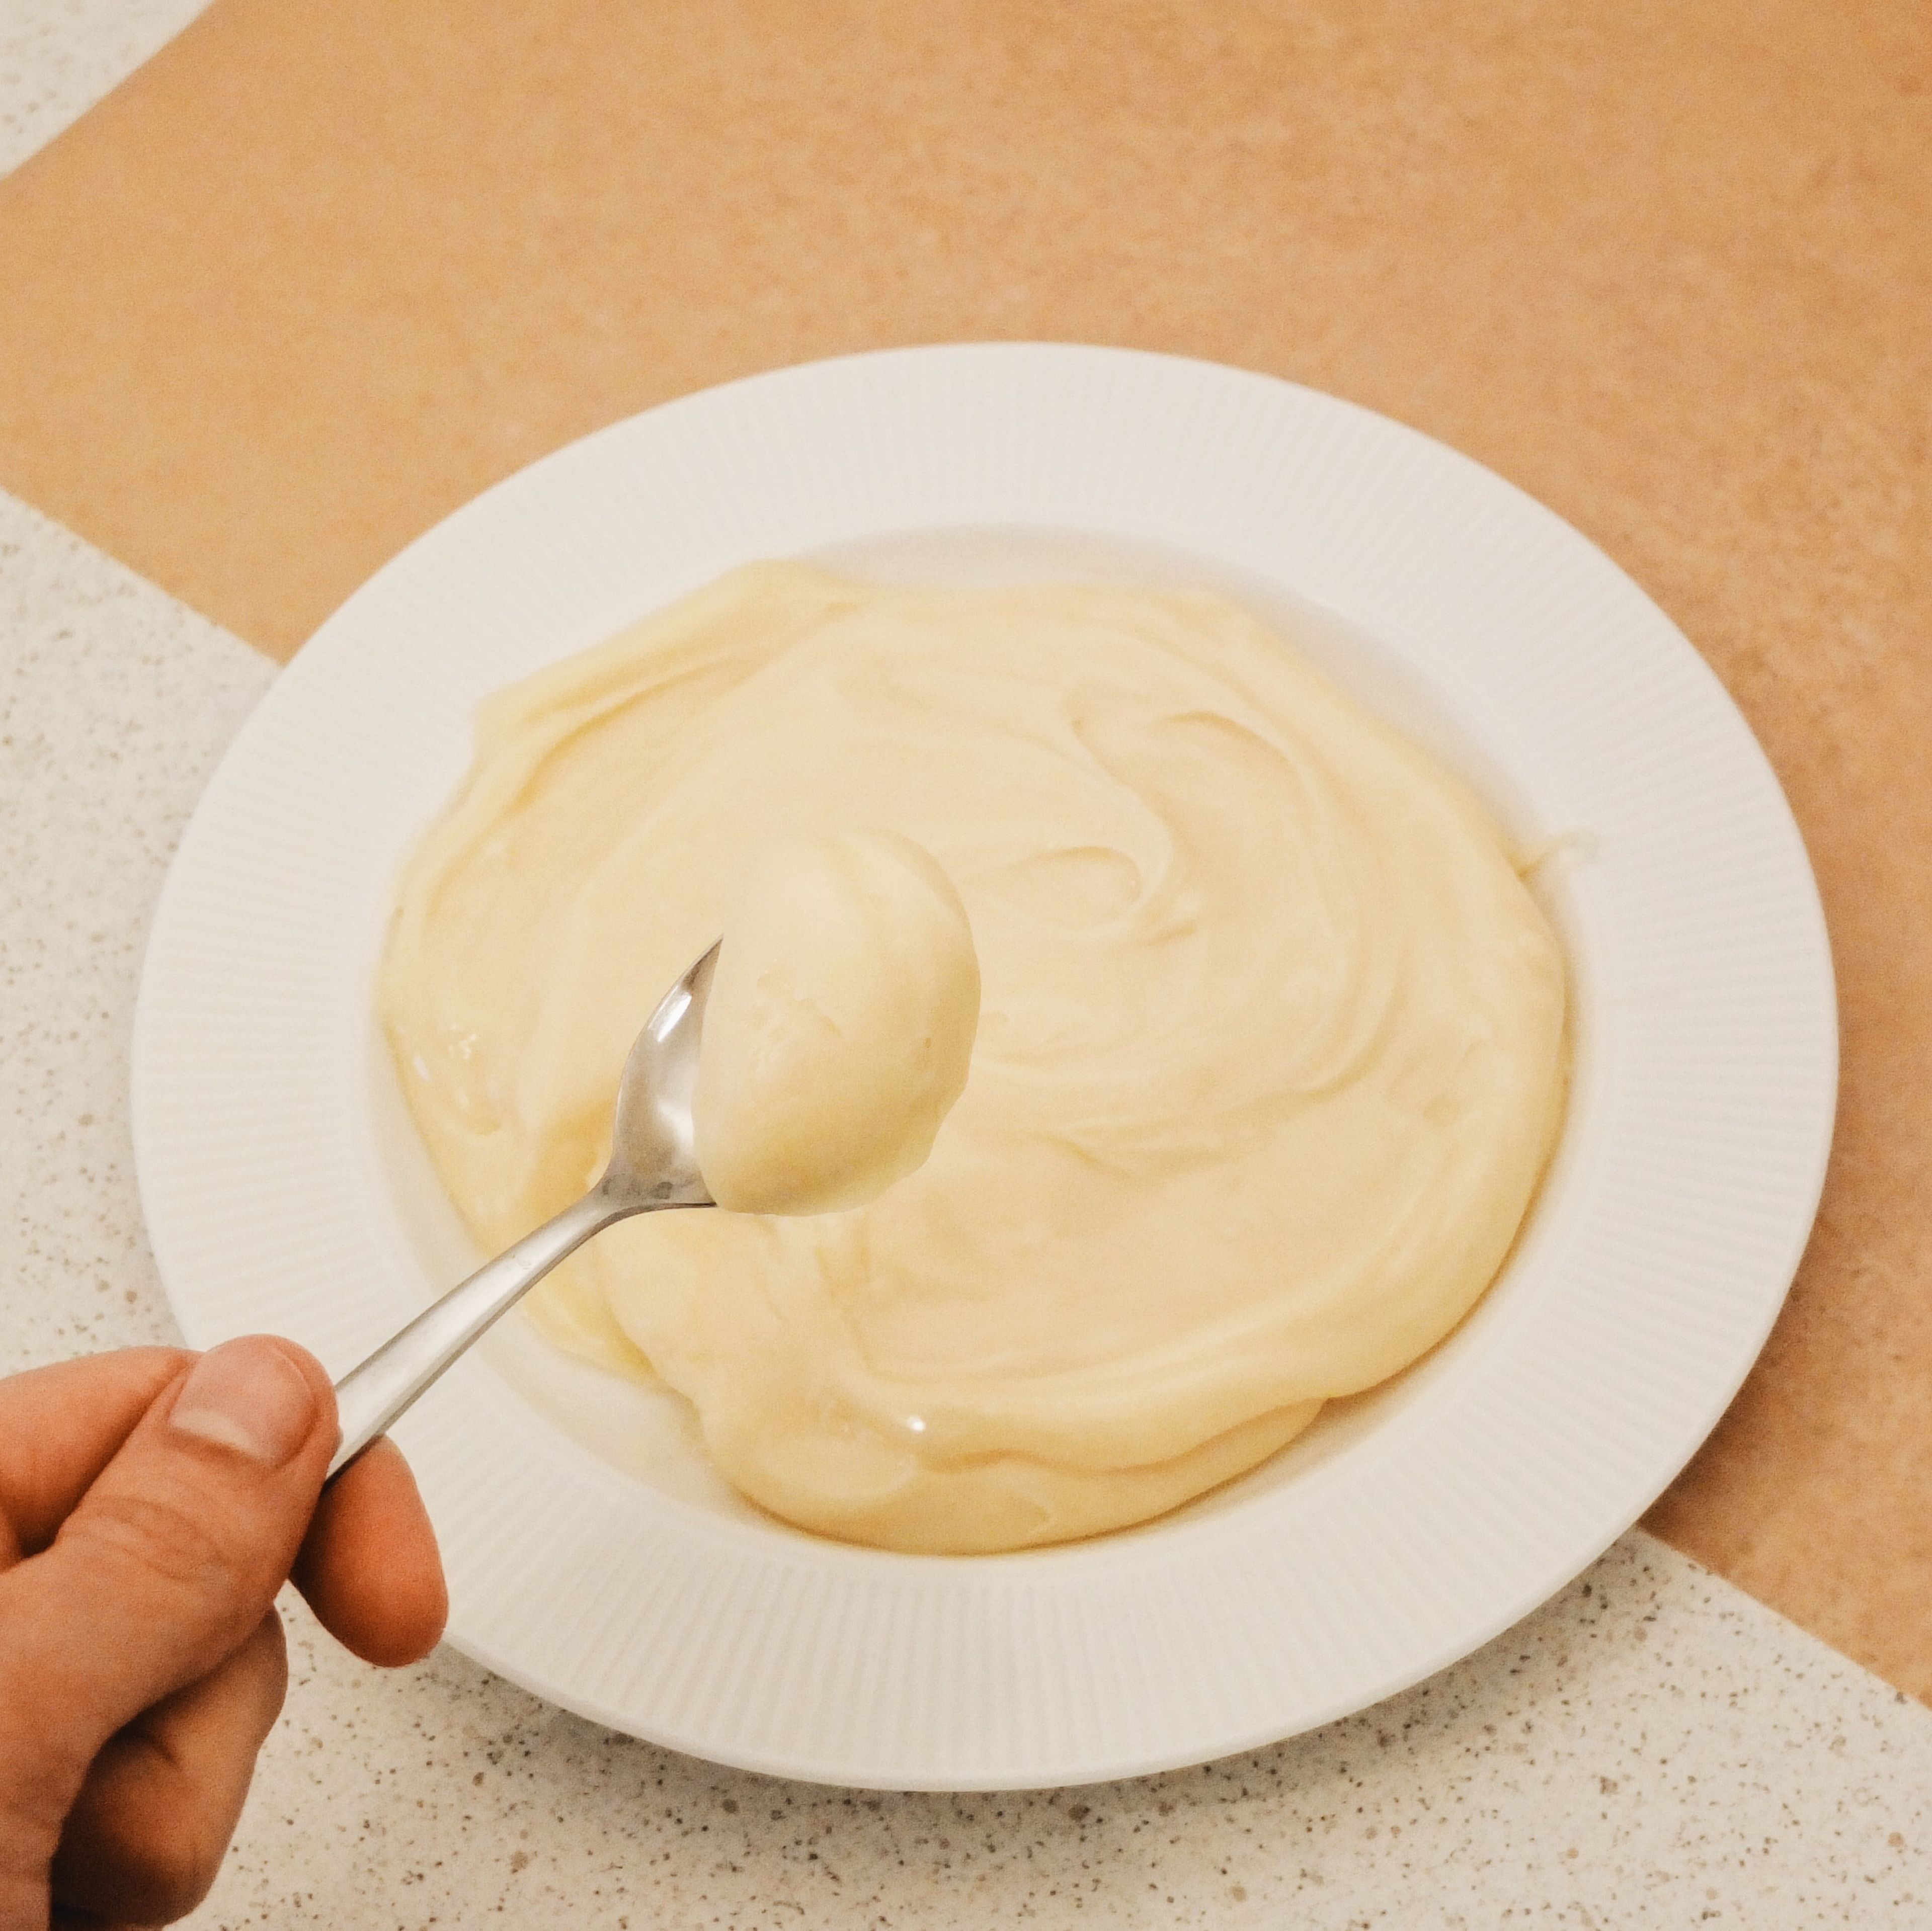 Spread butter on your hands and with a teaspoon scoop some of the mixture. Put it on your hand and roll it to form a small ball.